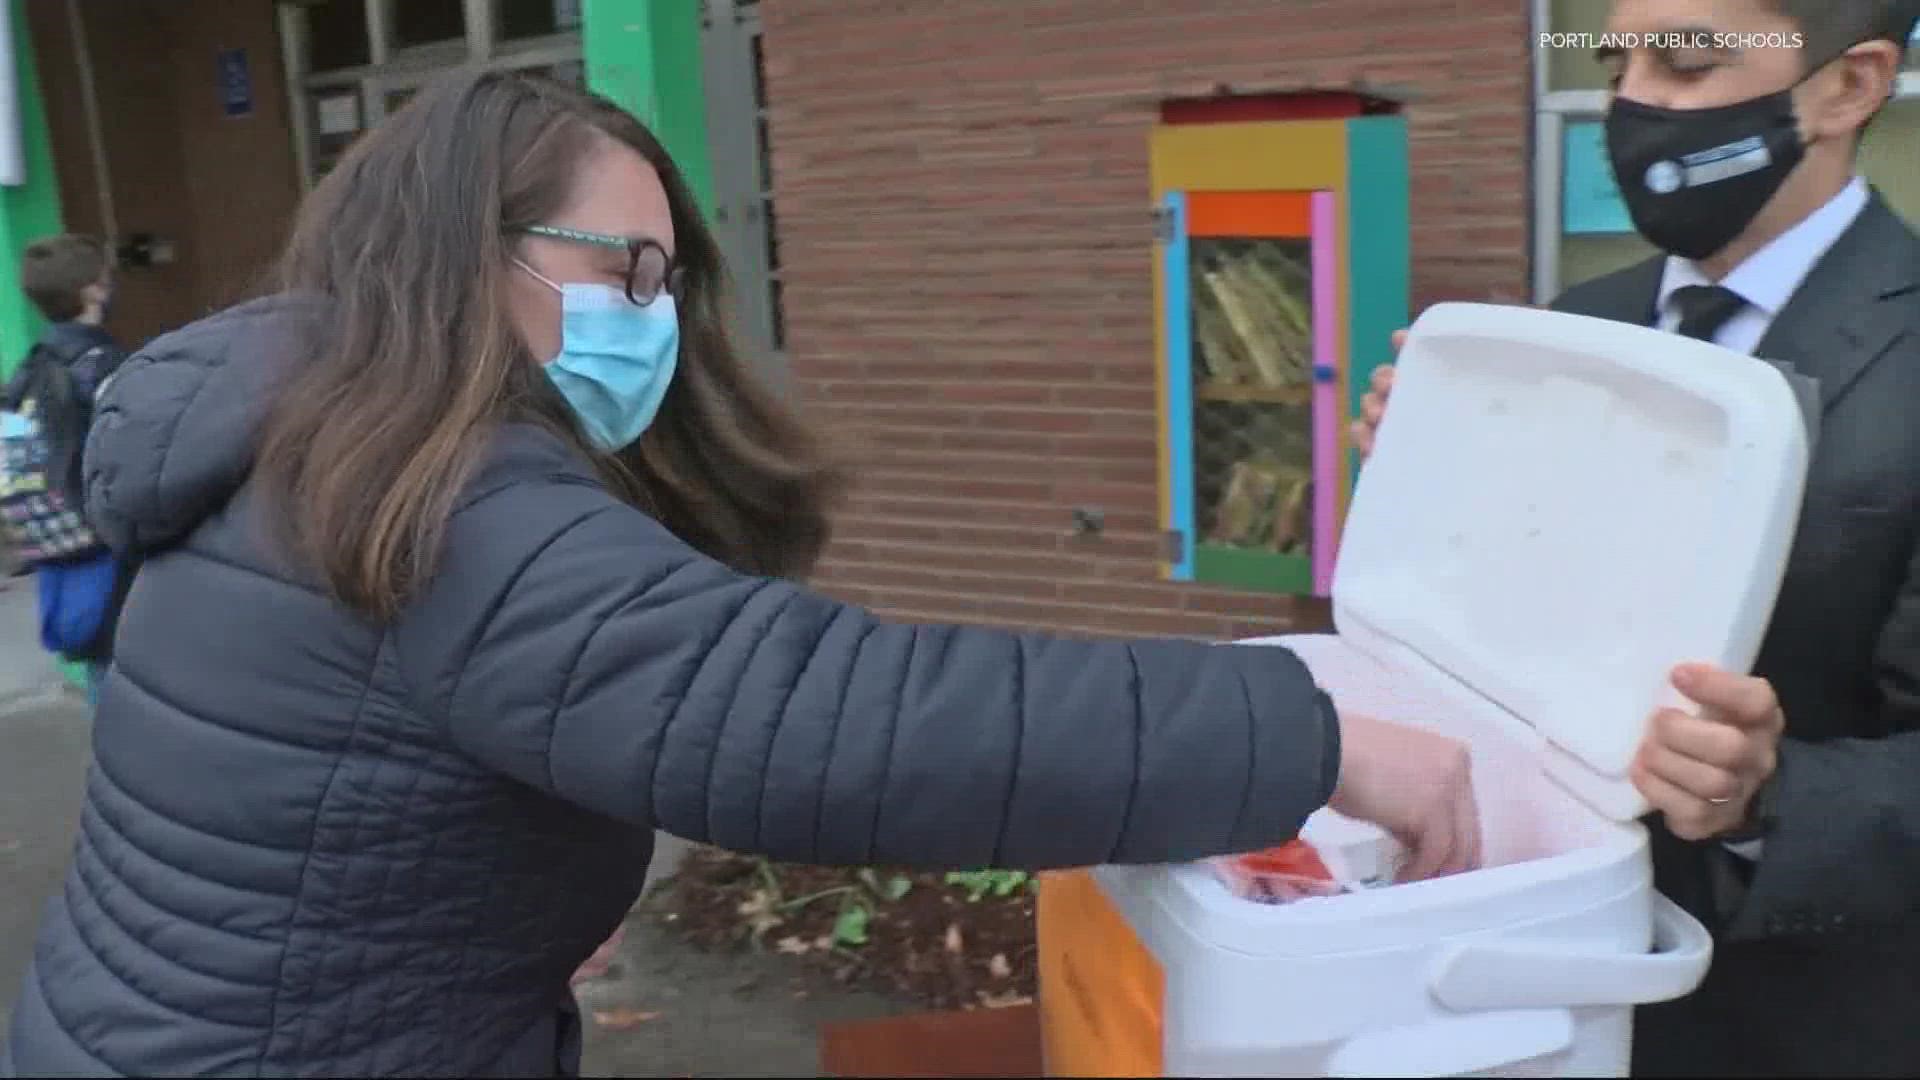 Portland Public Schools said it's moving as fast as possible to allow students to enroll in their weekly COVID testing program. KGW's Christine Pitawanich reports.